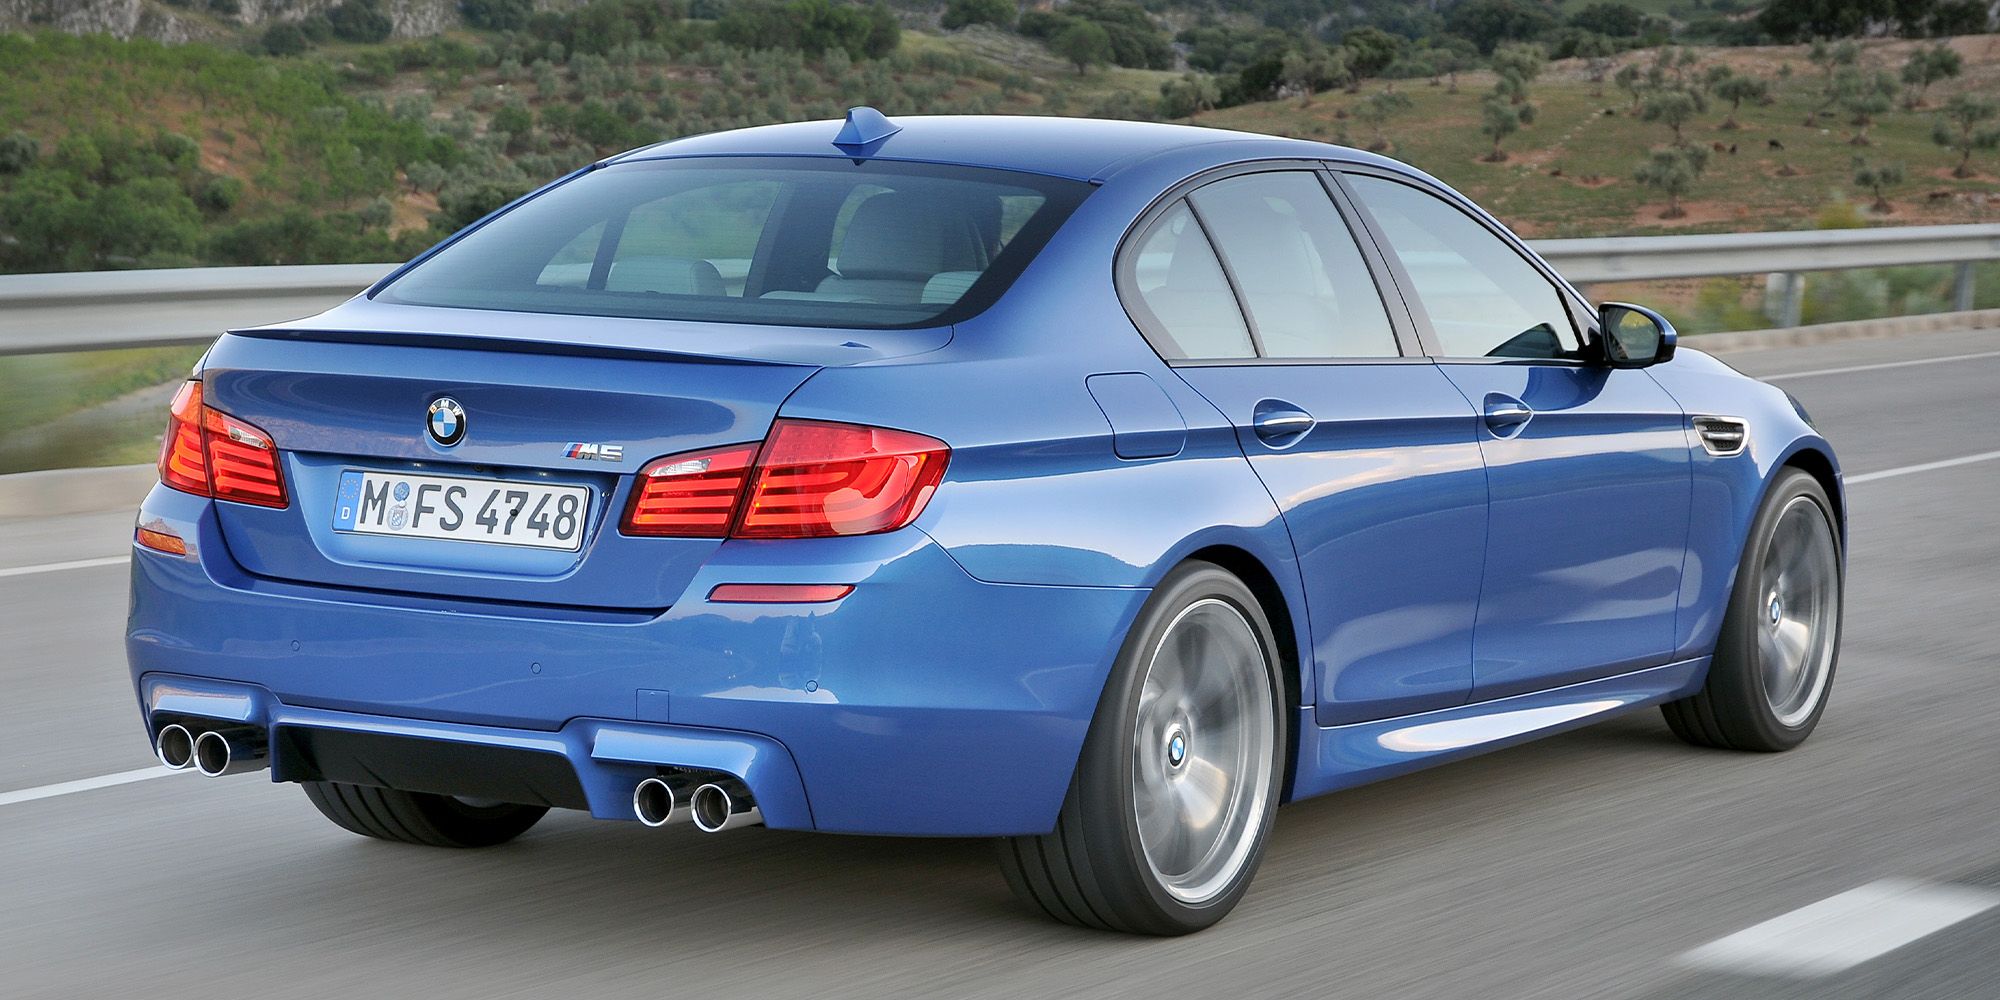 The rear of the F10 M5